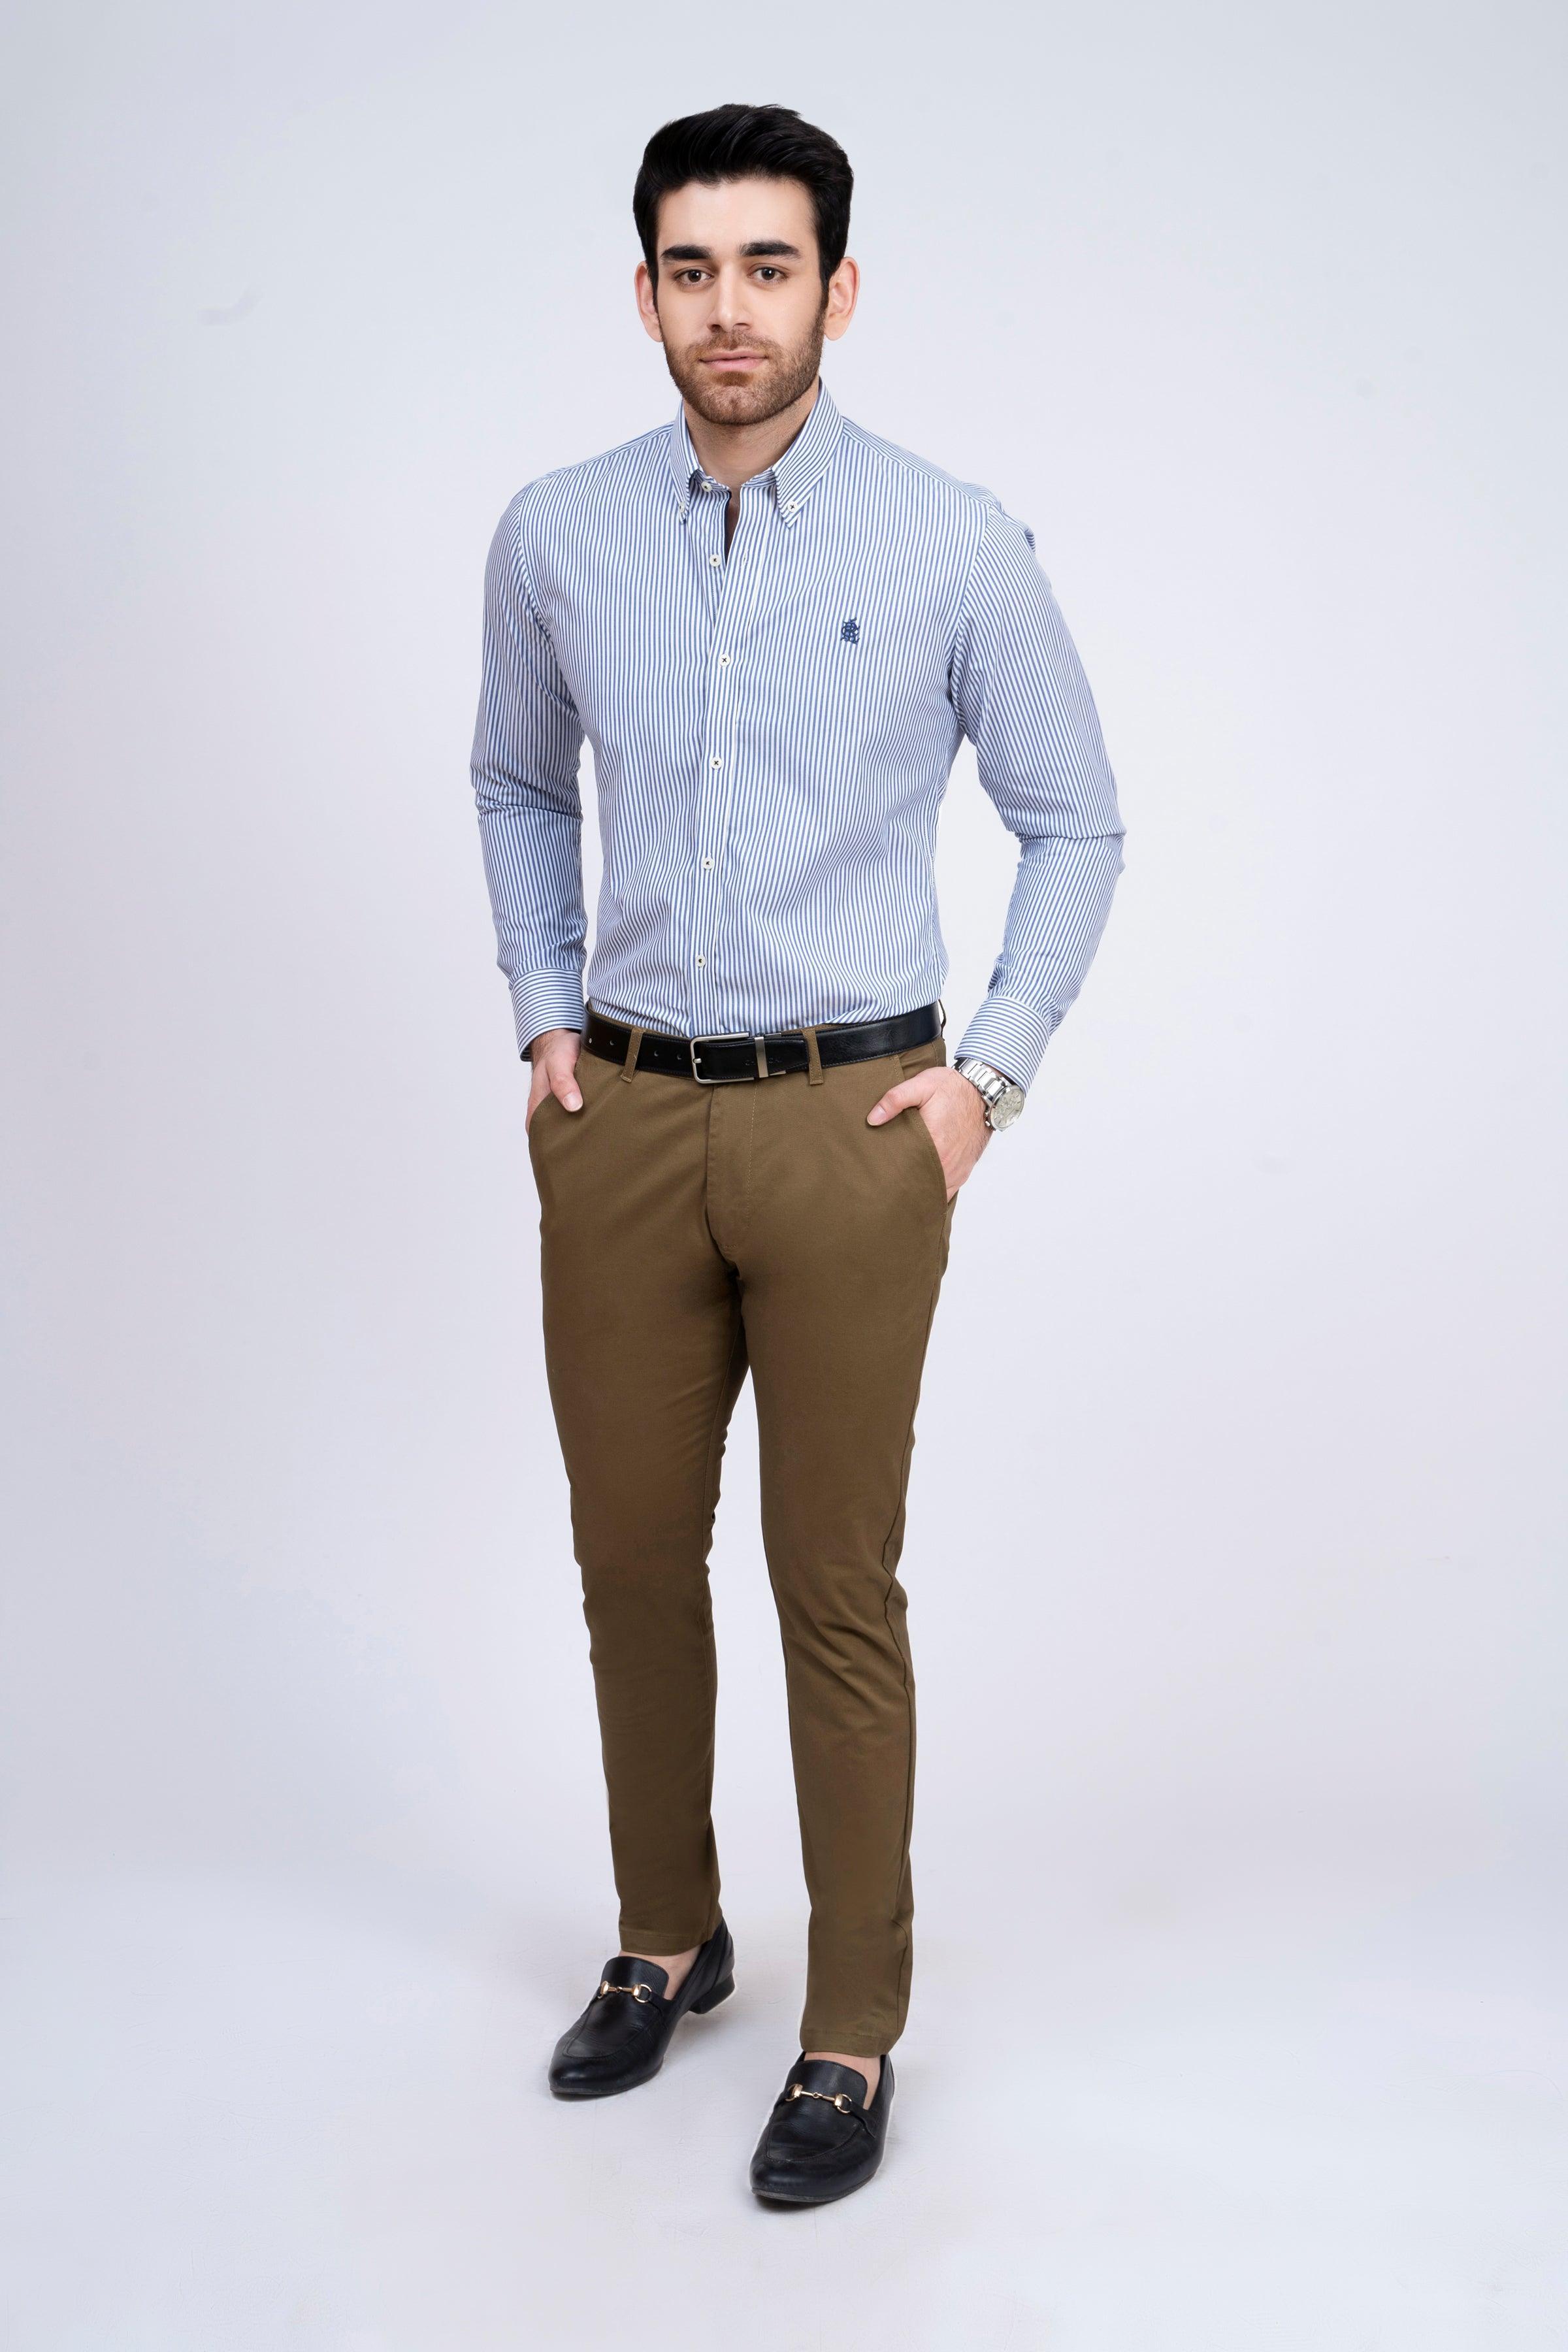 SEMI FORMAL SHIRT WHITE BLUE LINE at Charcoal Clothing